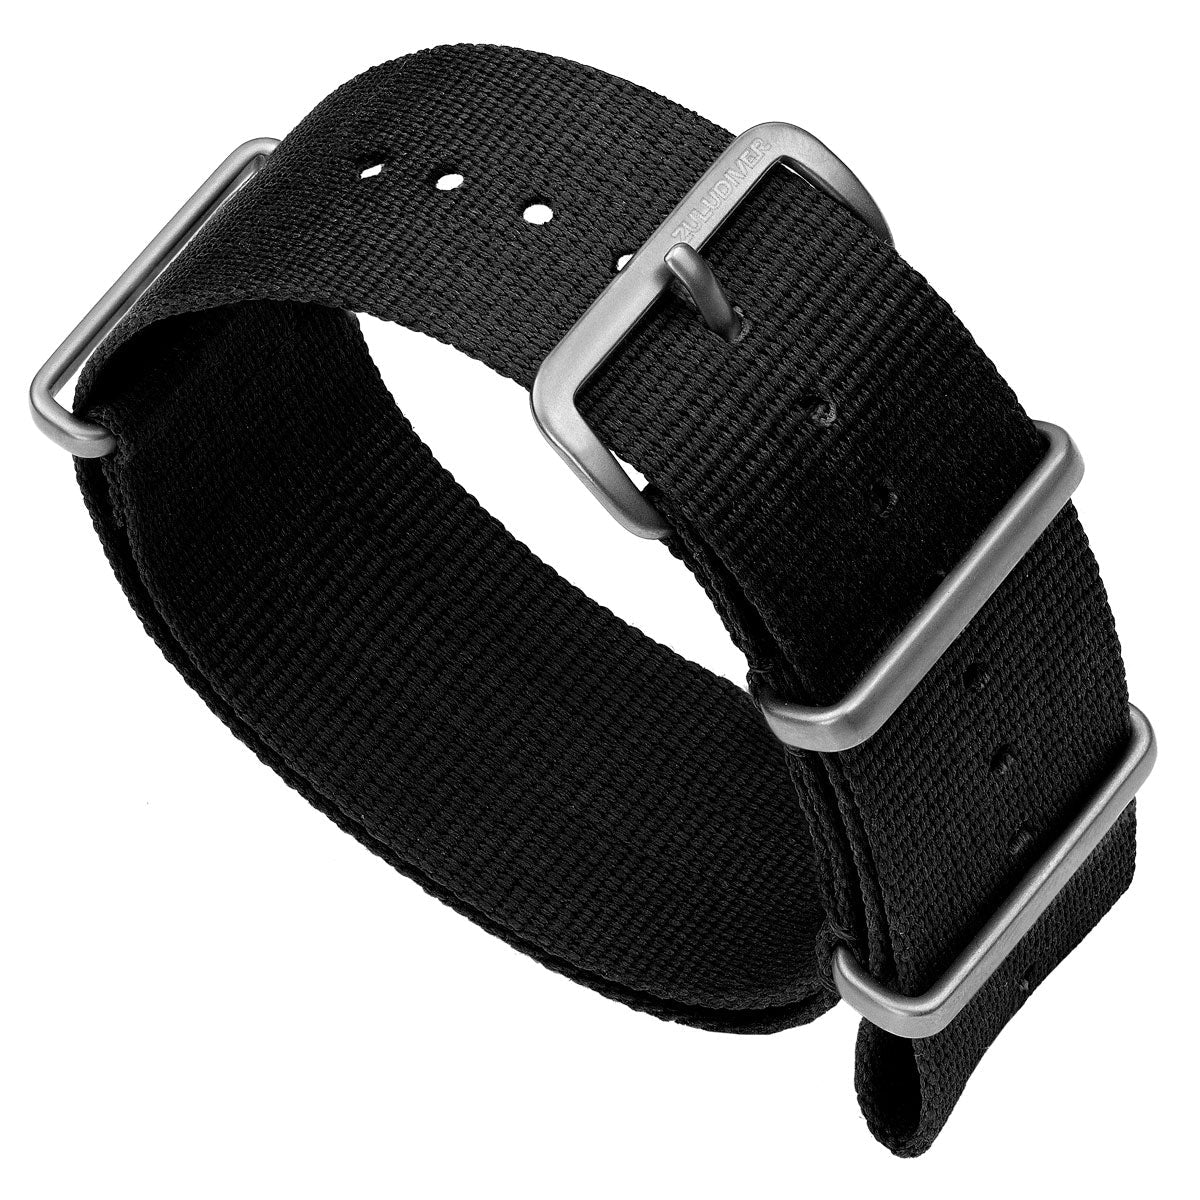 Nylon NATO watch strap, colour black, with stainless steel satin finish hardware